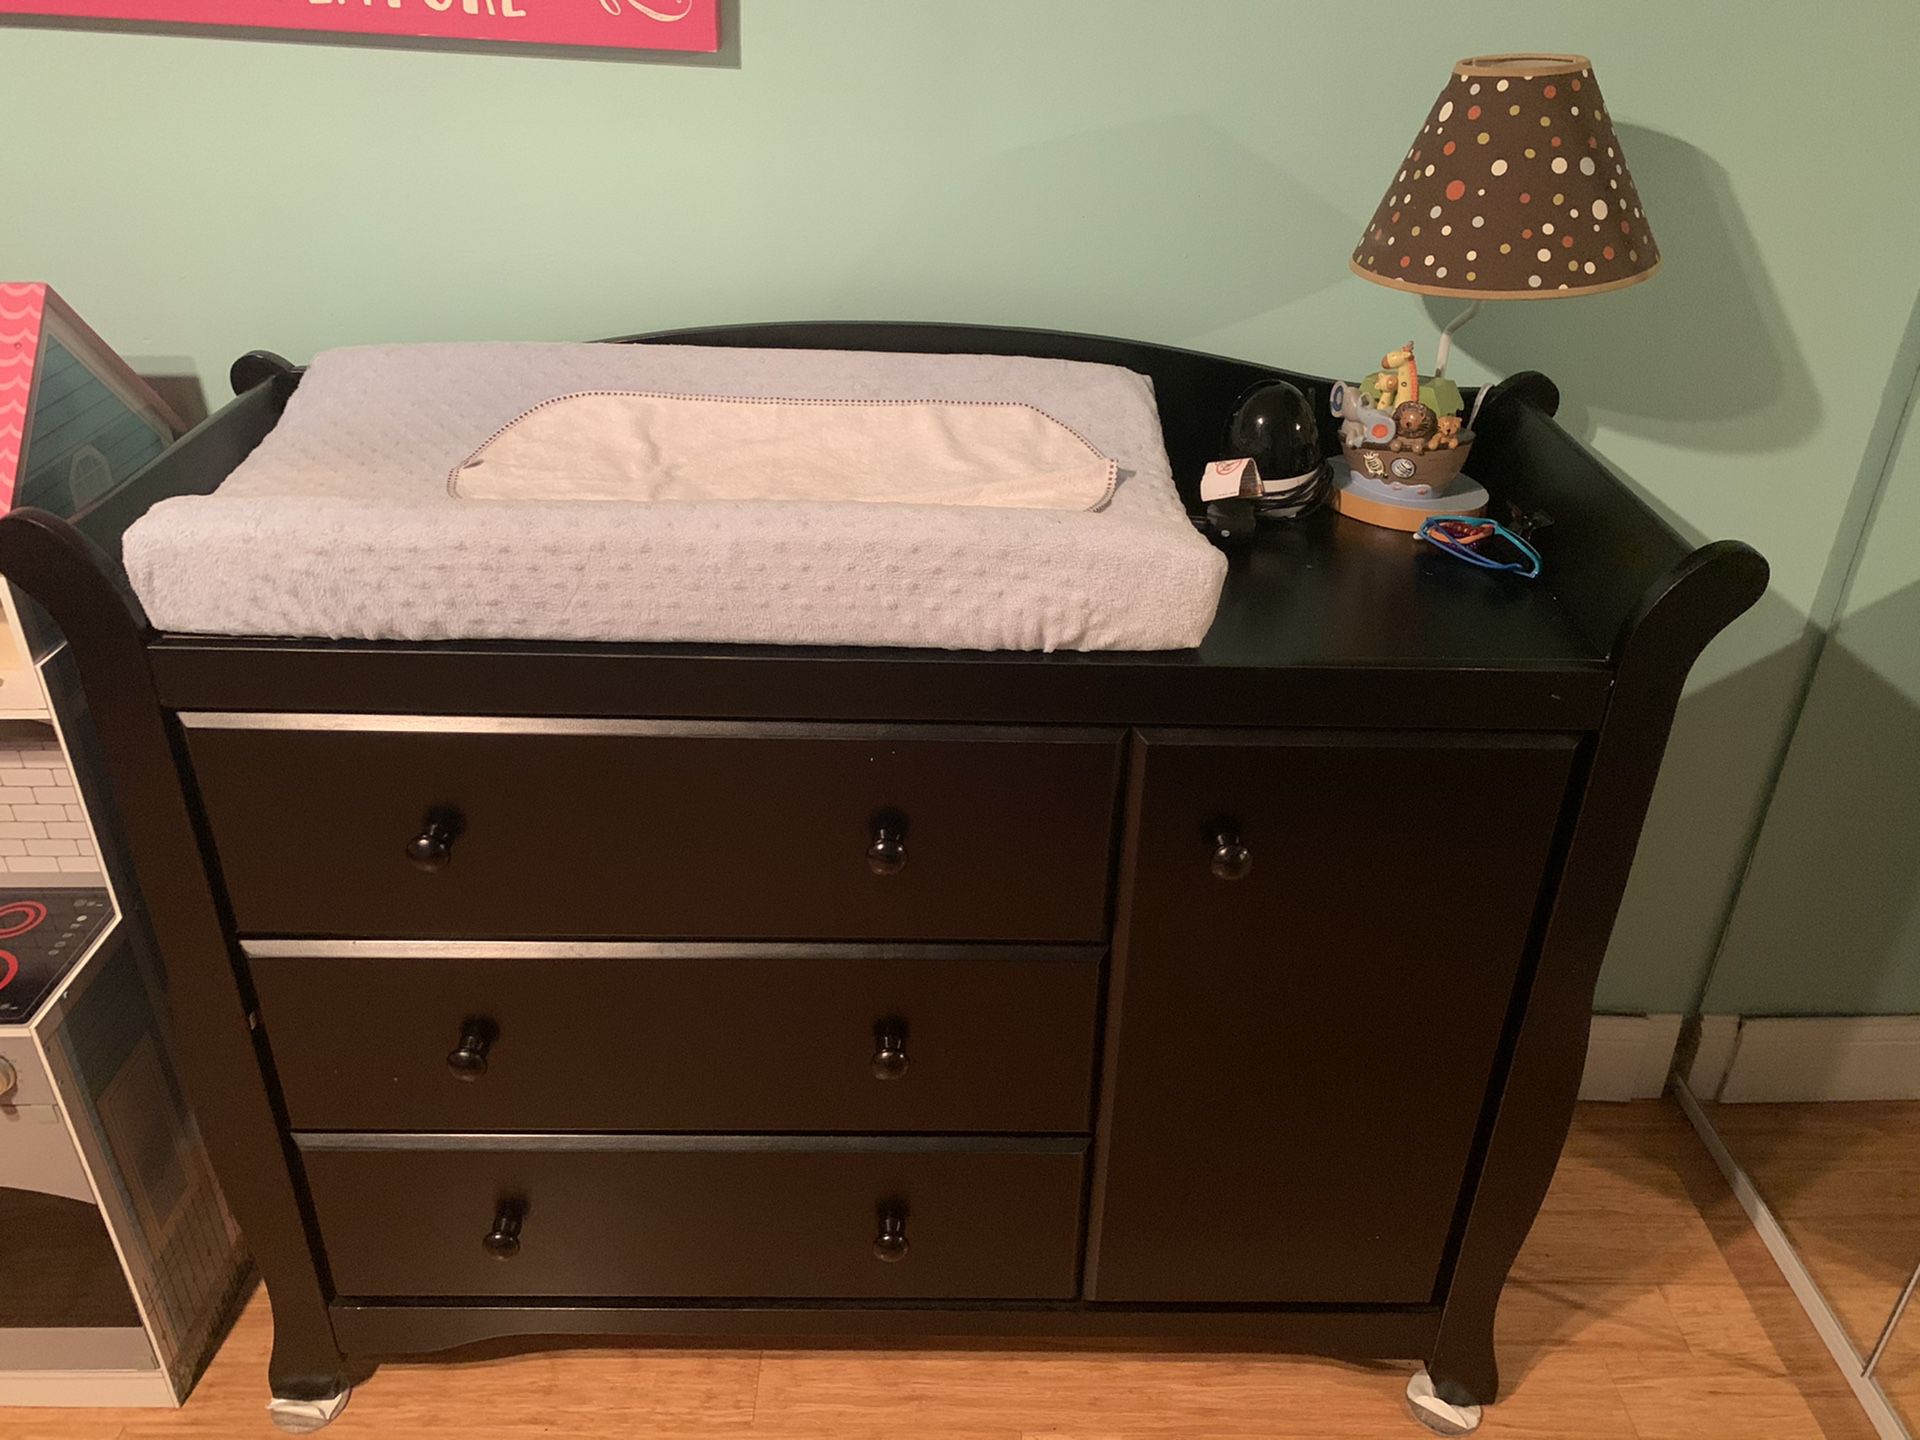 Crib and dresser changing table combo